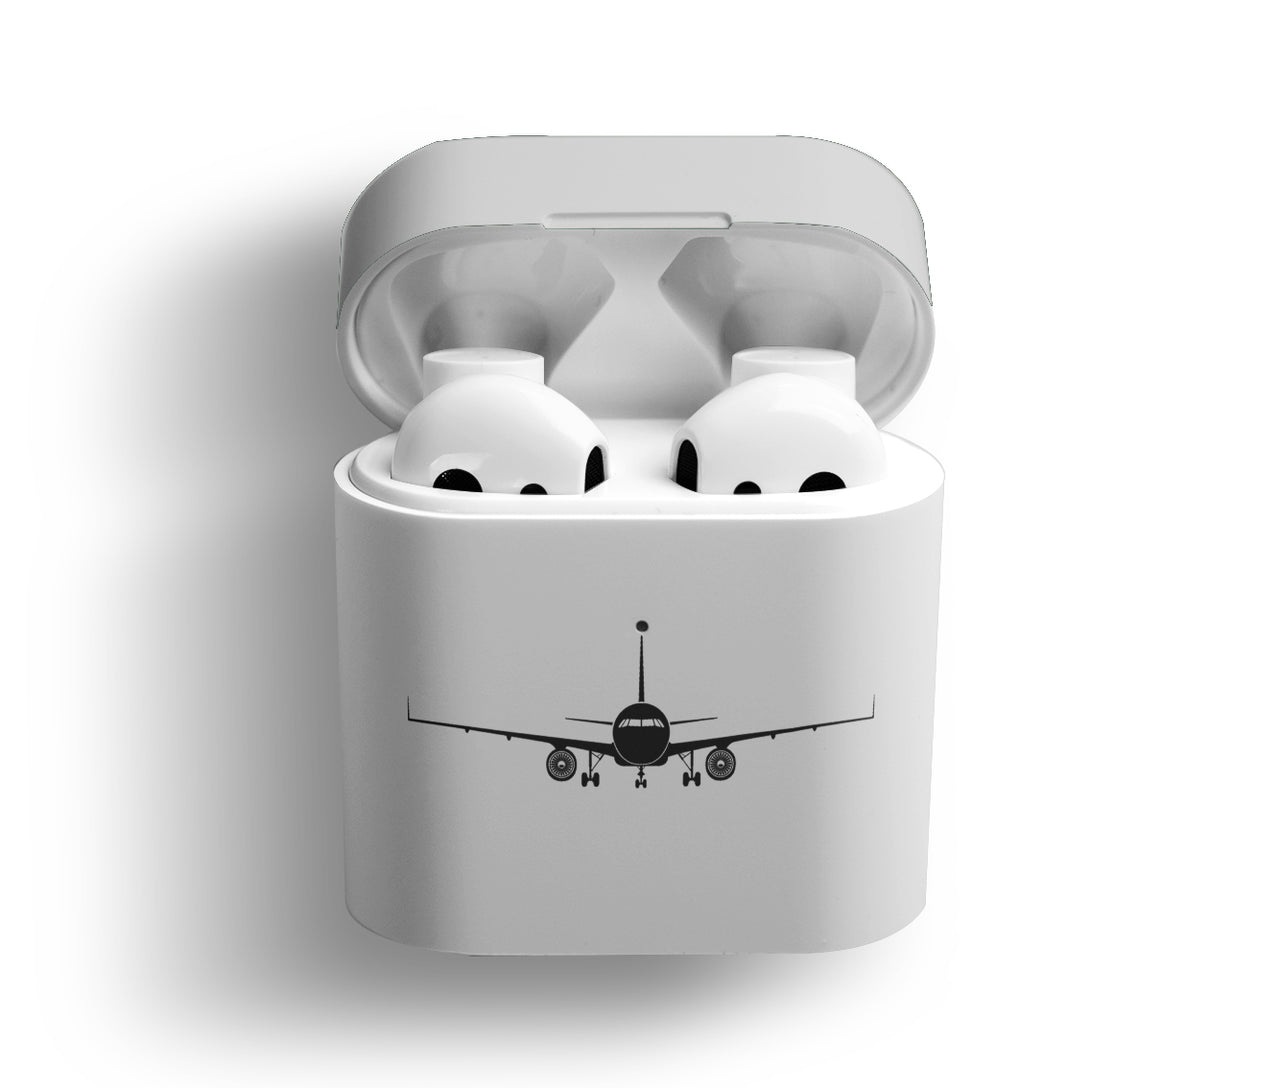 Airbus A320 Silhouette Designed AirPods Cases